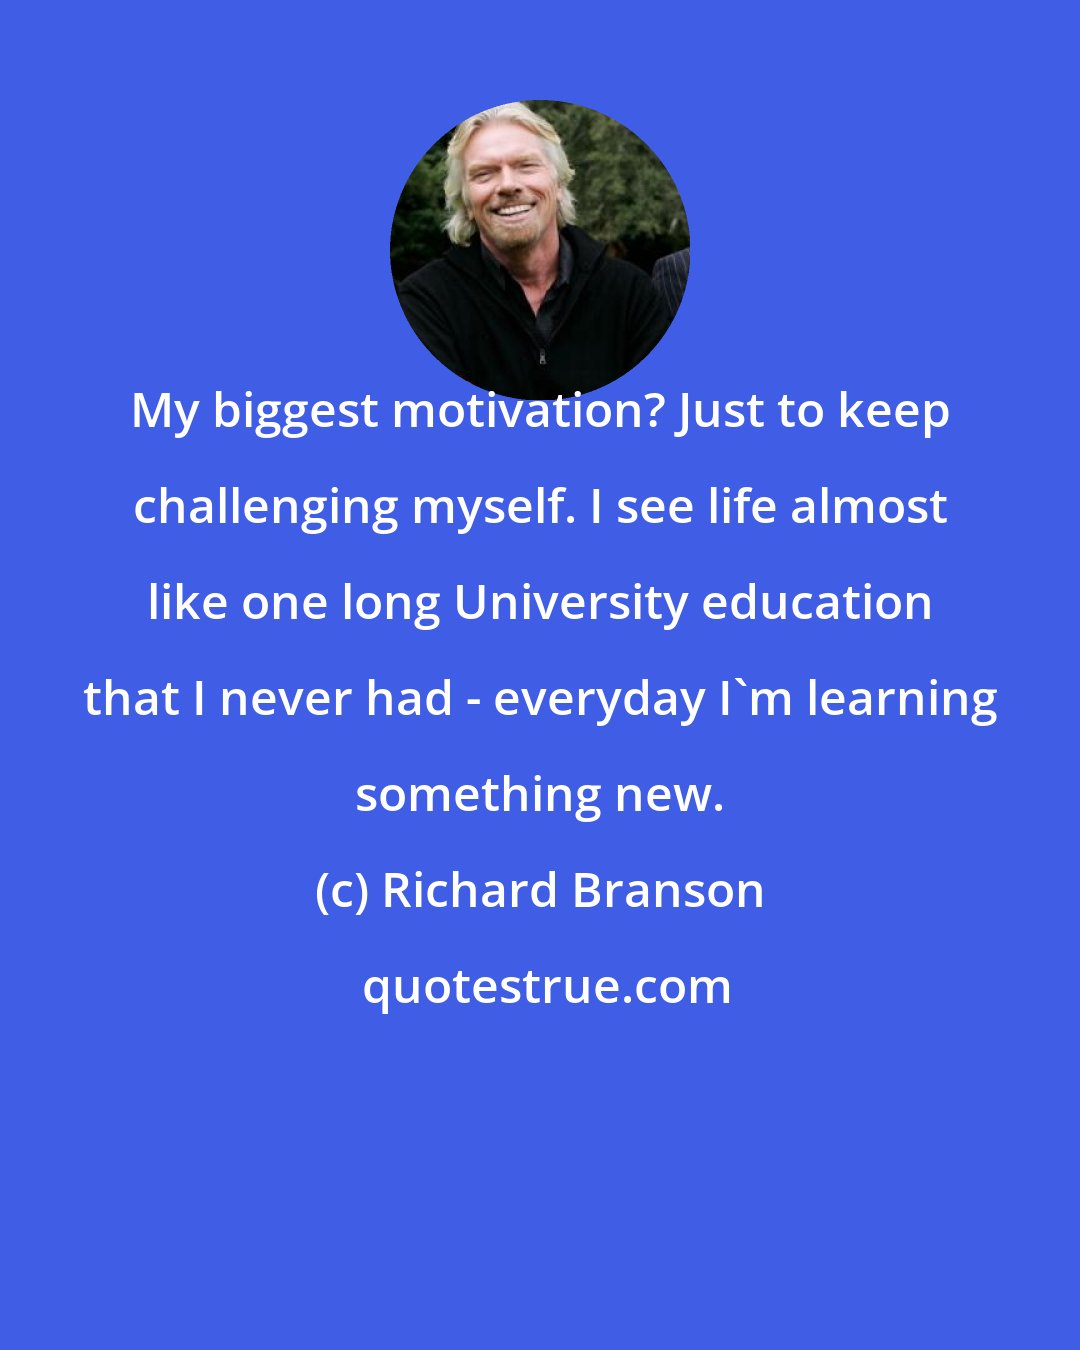 Richard Branson: My biggest motivation? Just to keep challenging myself. I see life almost like one long University education that I never had - everyday I'm learning something new.